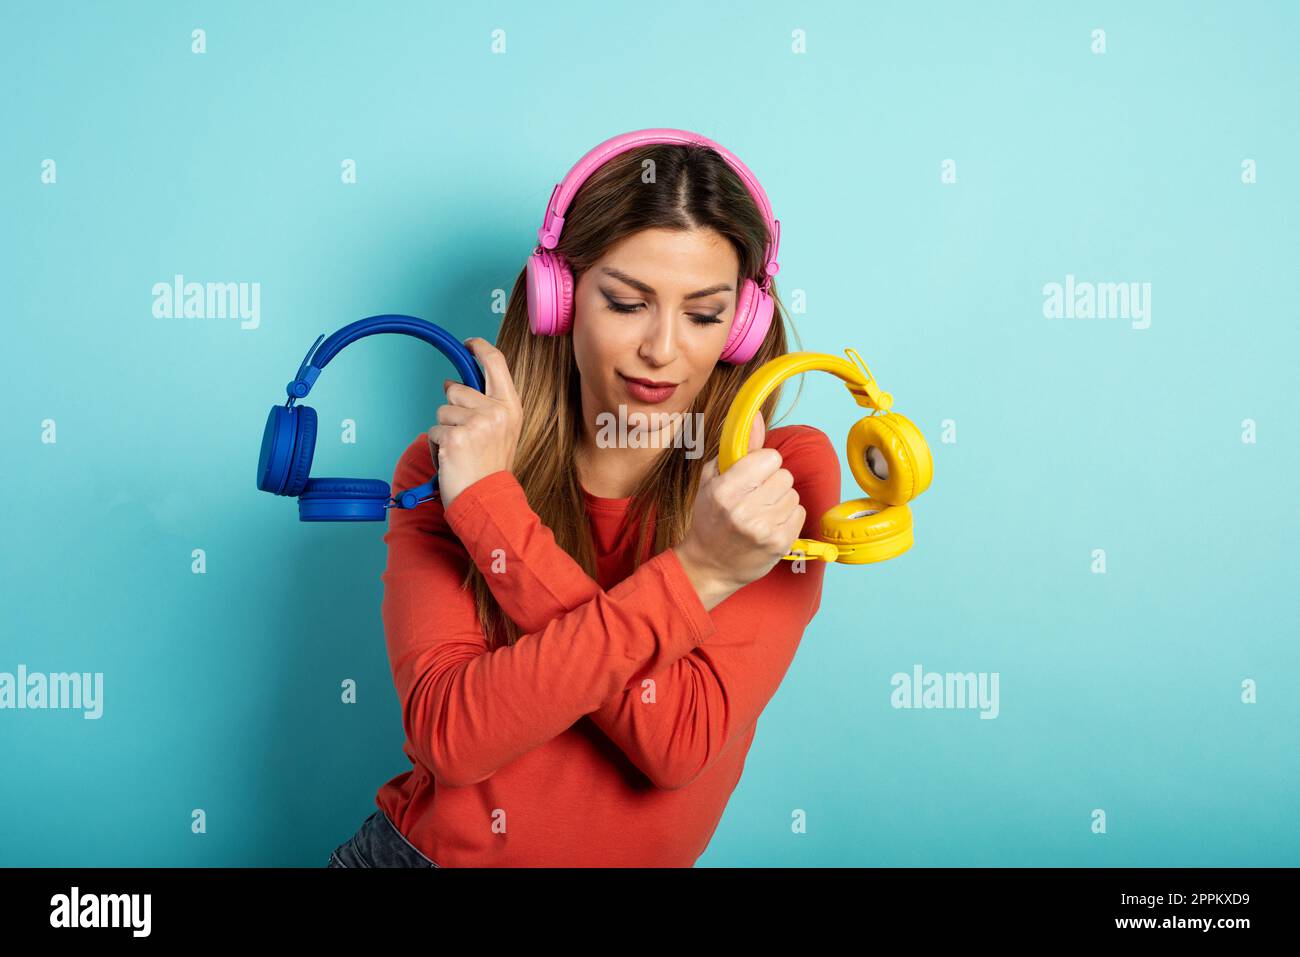 Girl with headset listens to music and dances. emotional and energetic expression. Cyan background Stock Photo